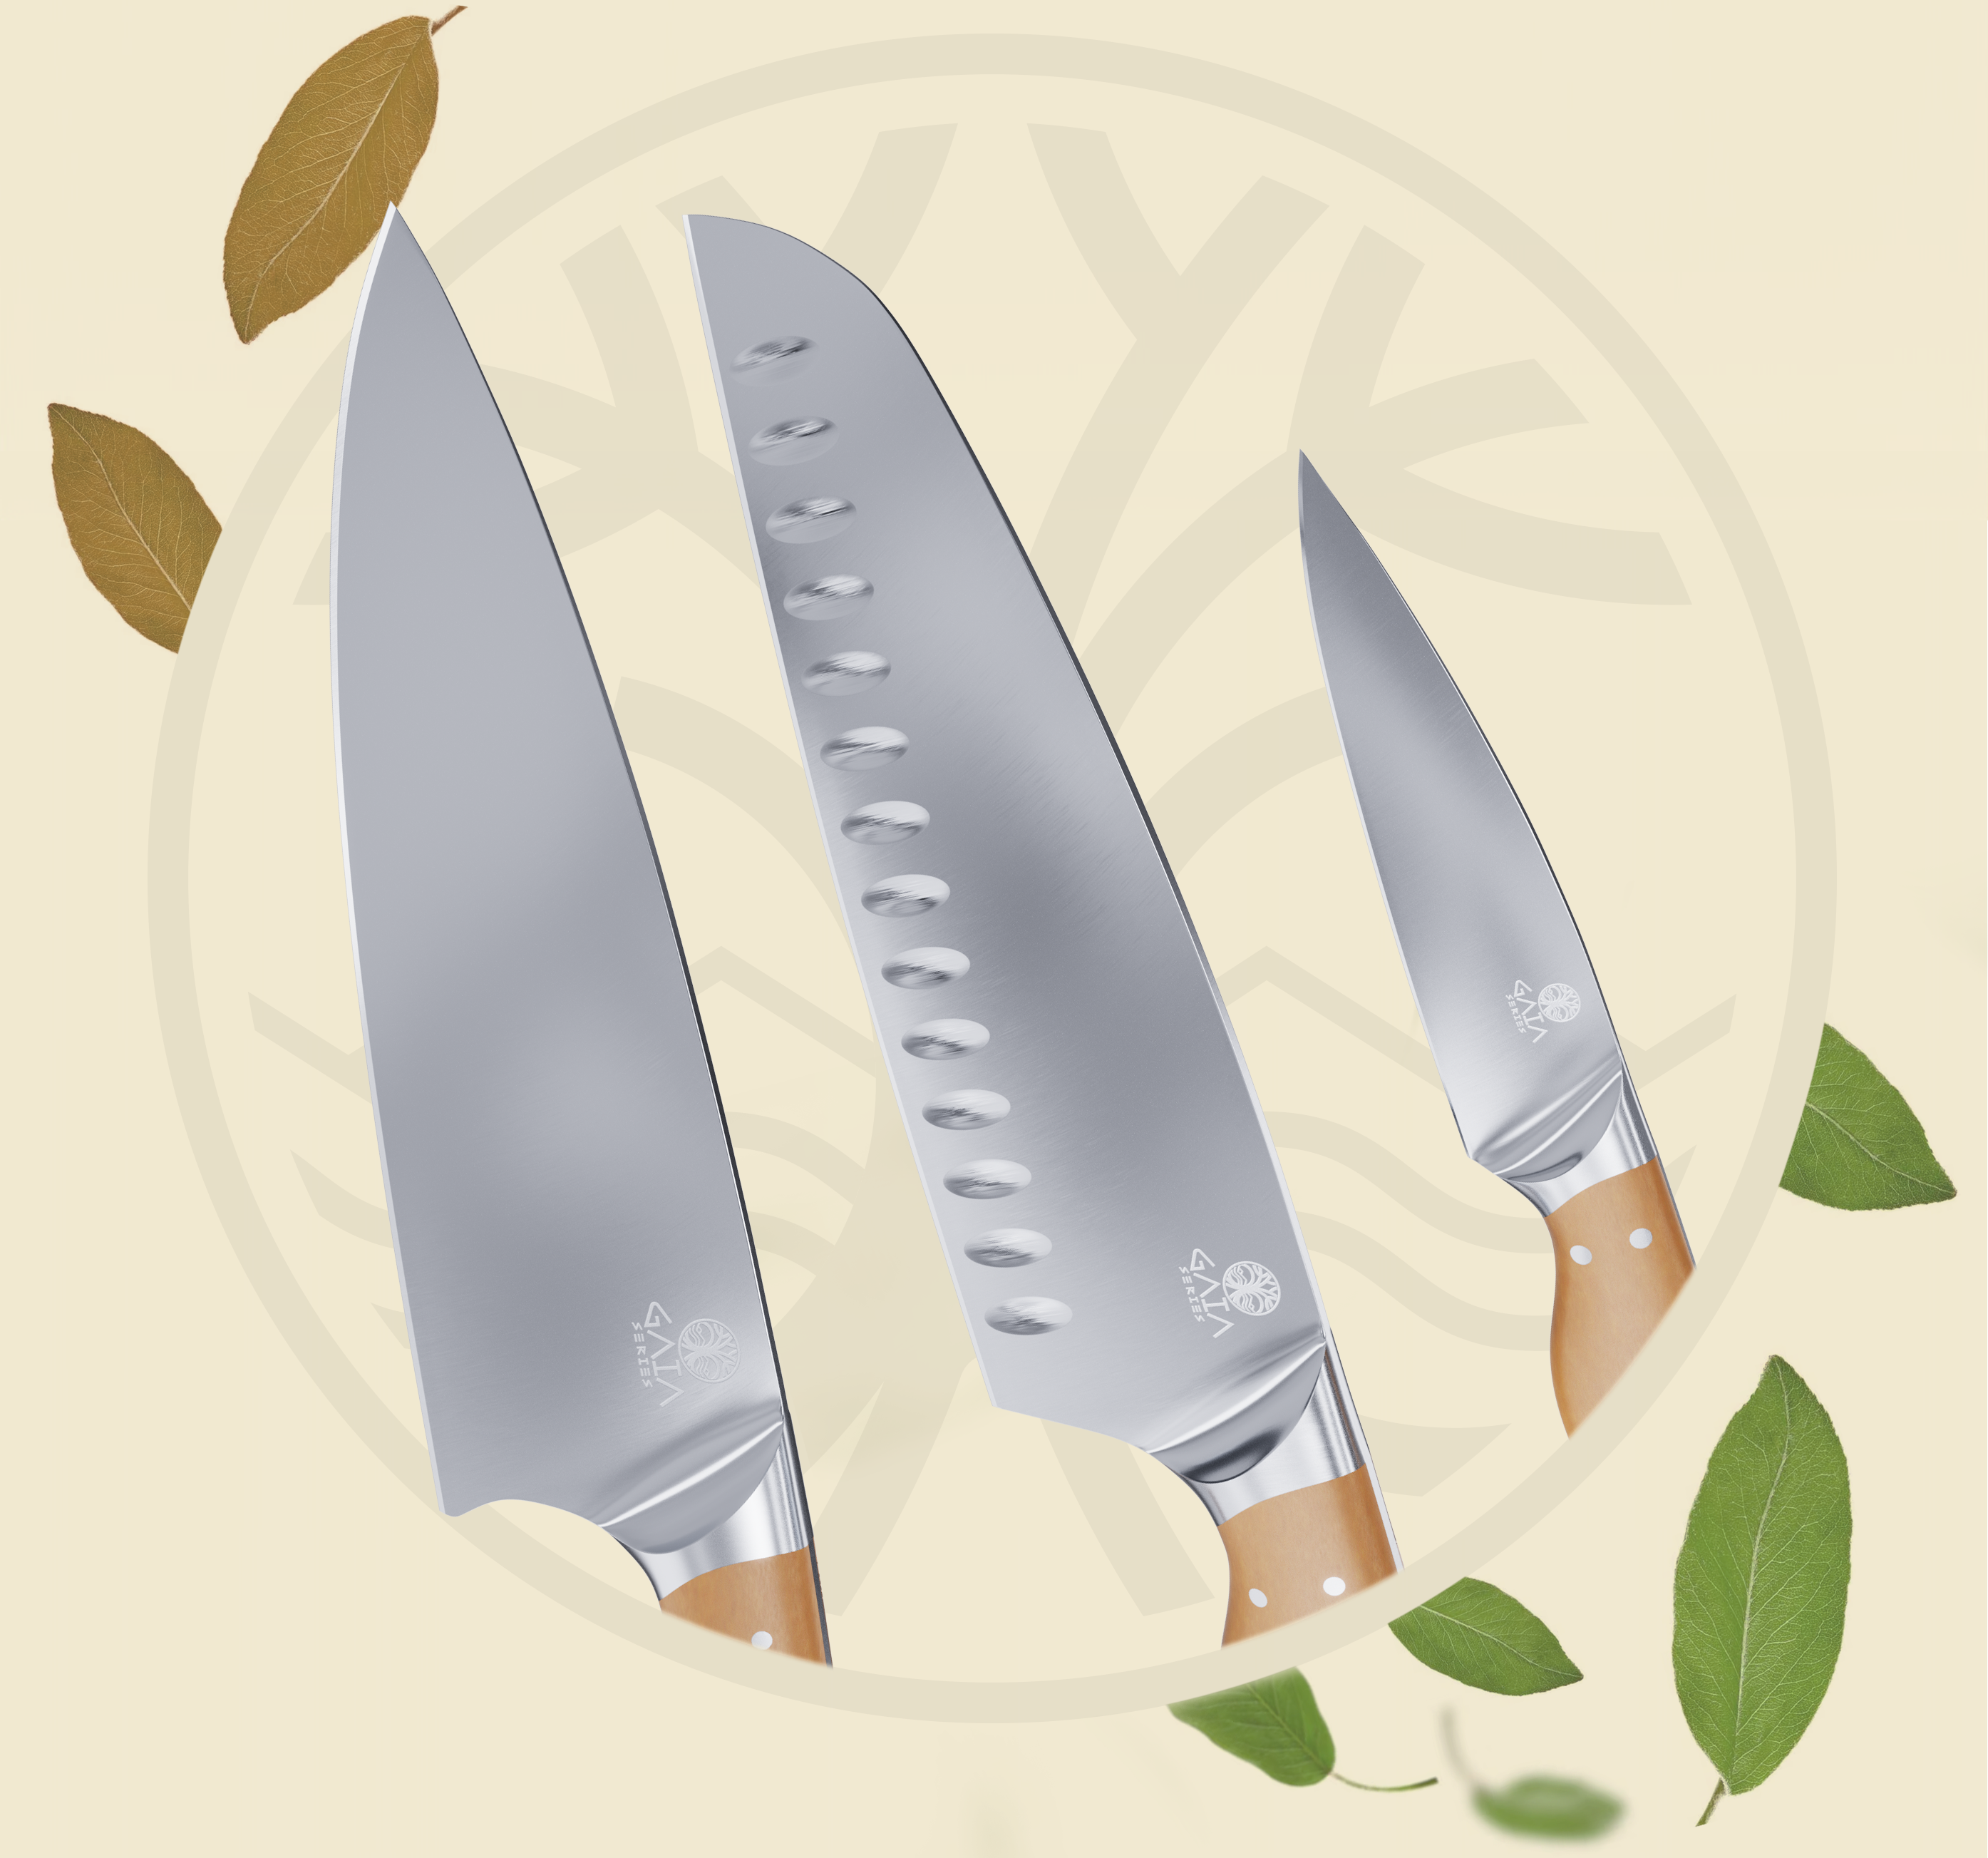  Dalstrong 3 Piece Knife Set - Gaia Series - Chef Knife, Santoku  Knife, Paring Knife - High-Density Wood Fiber Handle - Sustainable and  Eco-friendly Kitchen - Sheaths : Home & Kitchen